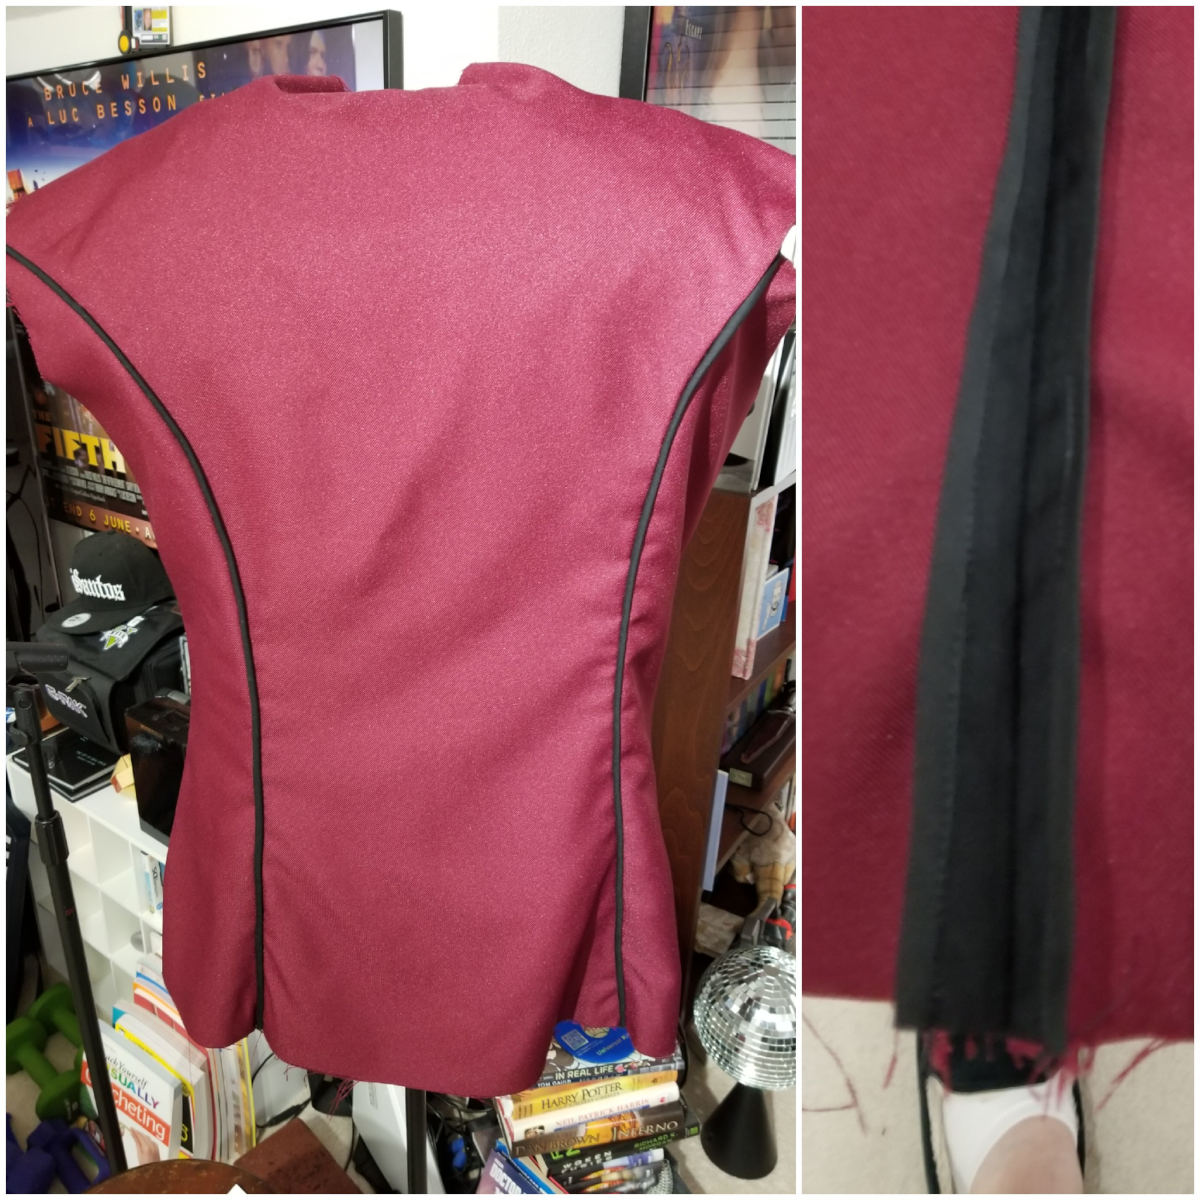 September 14, 2019: The jacket piping is done